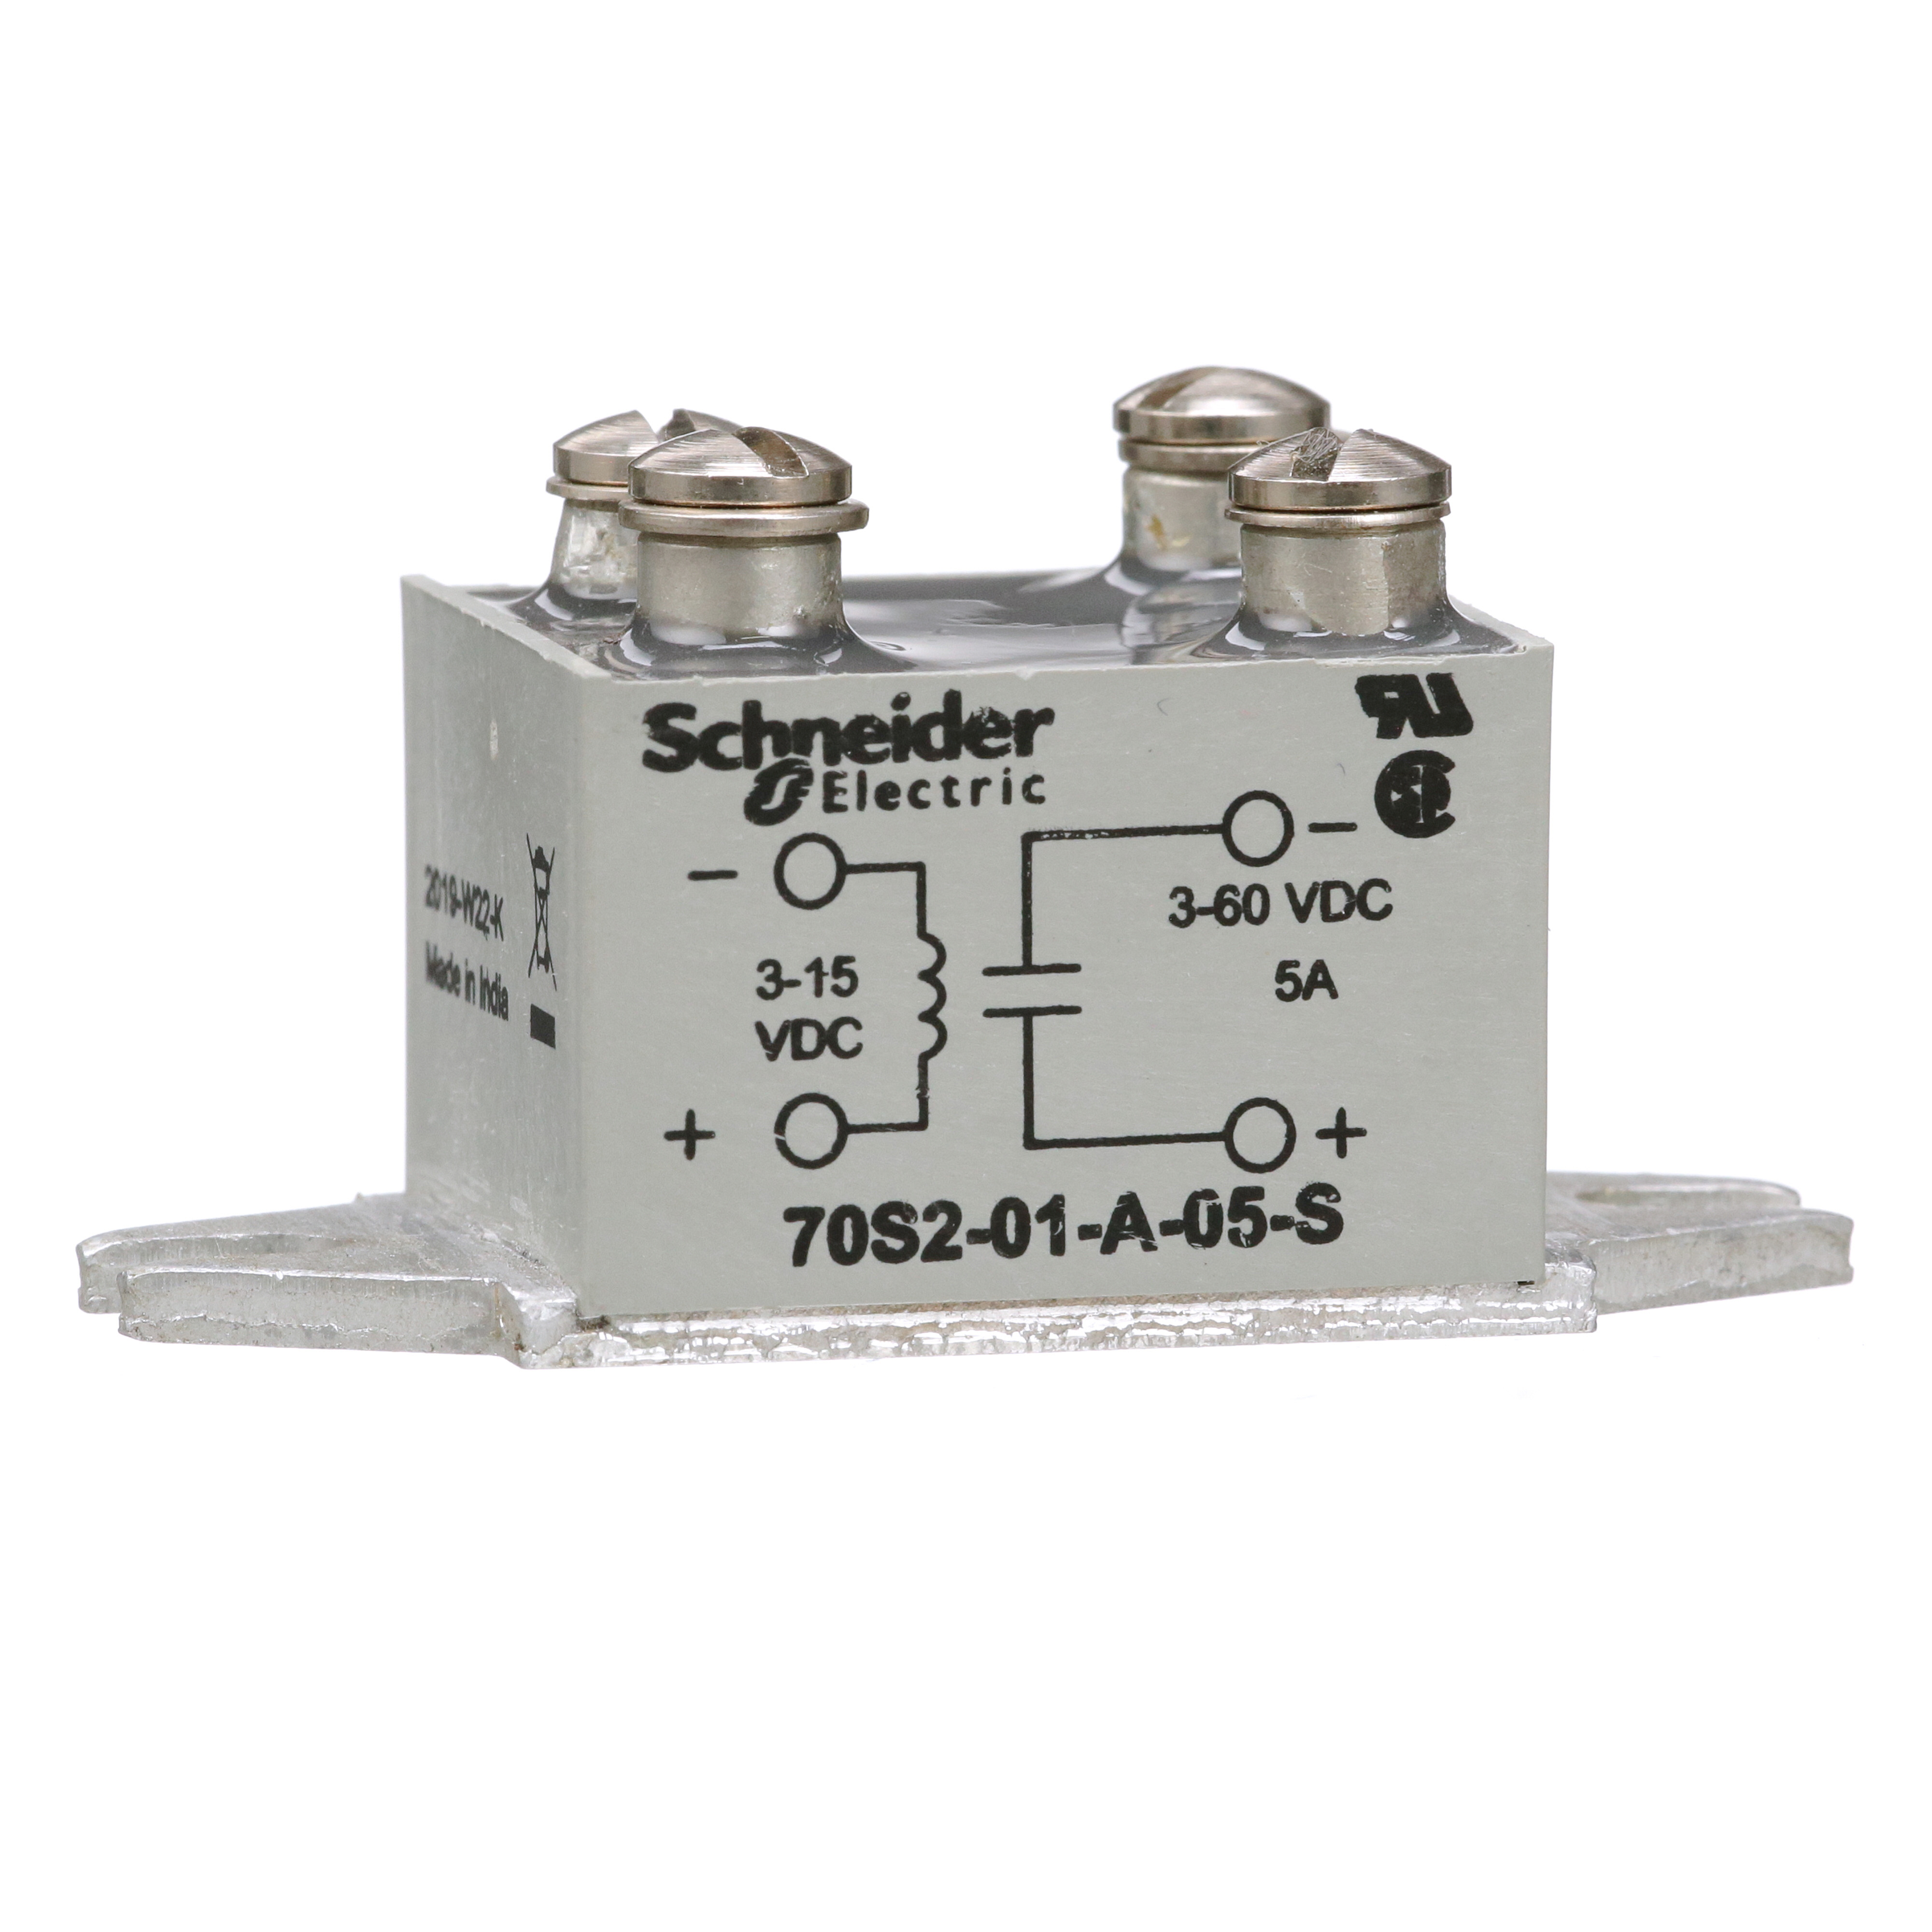 Relay, SE Relays, solid state, SPST, 5A, 3…60 VDC, 3…15 VDC Uc, MOSFET, panel mount, screw terminal